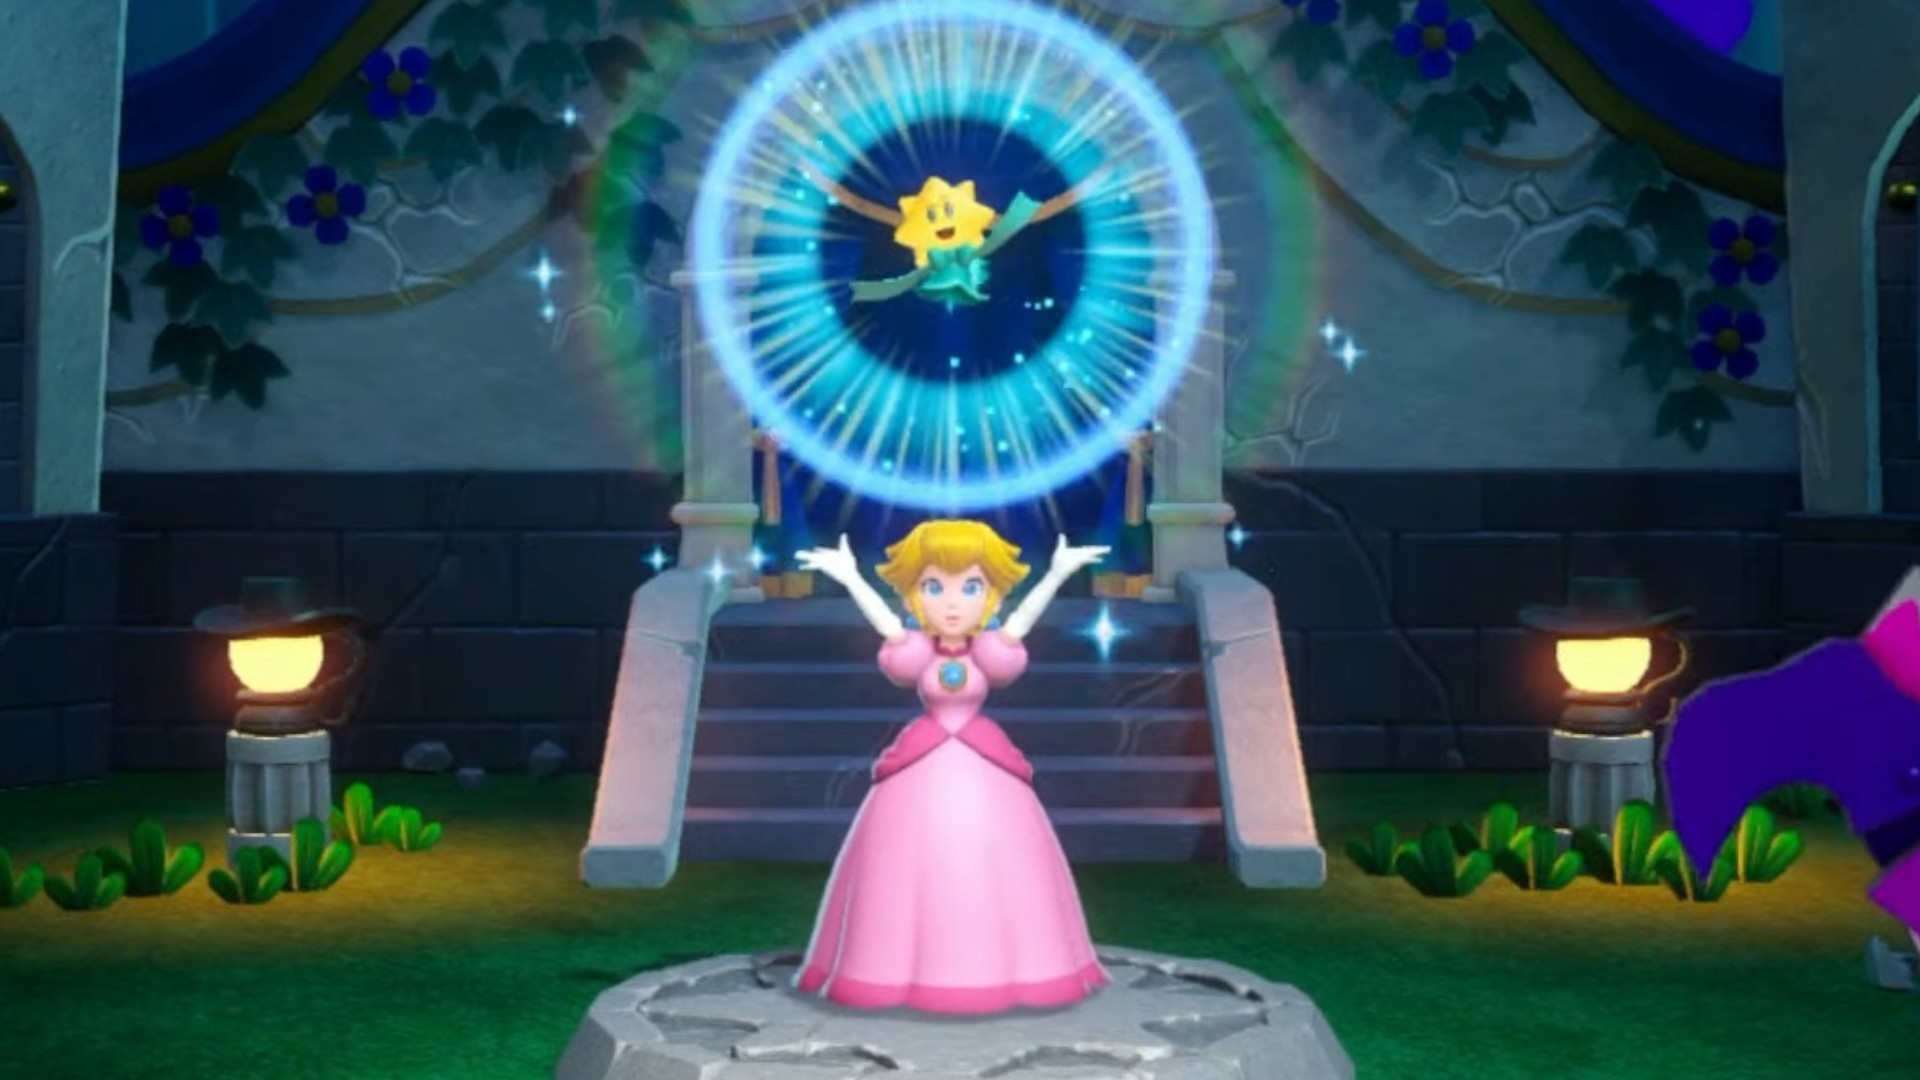 I'm dying to know more about that Nintendo Direct Princess Peach